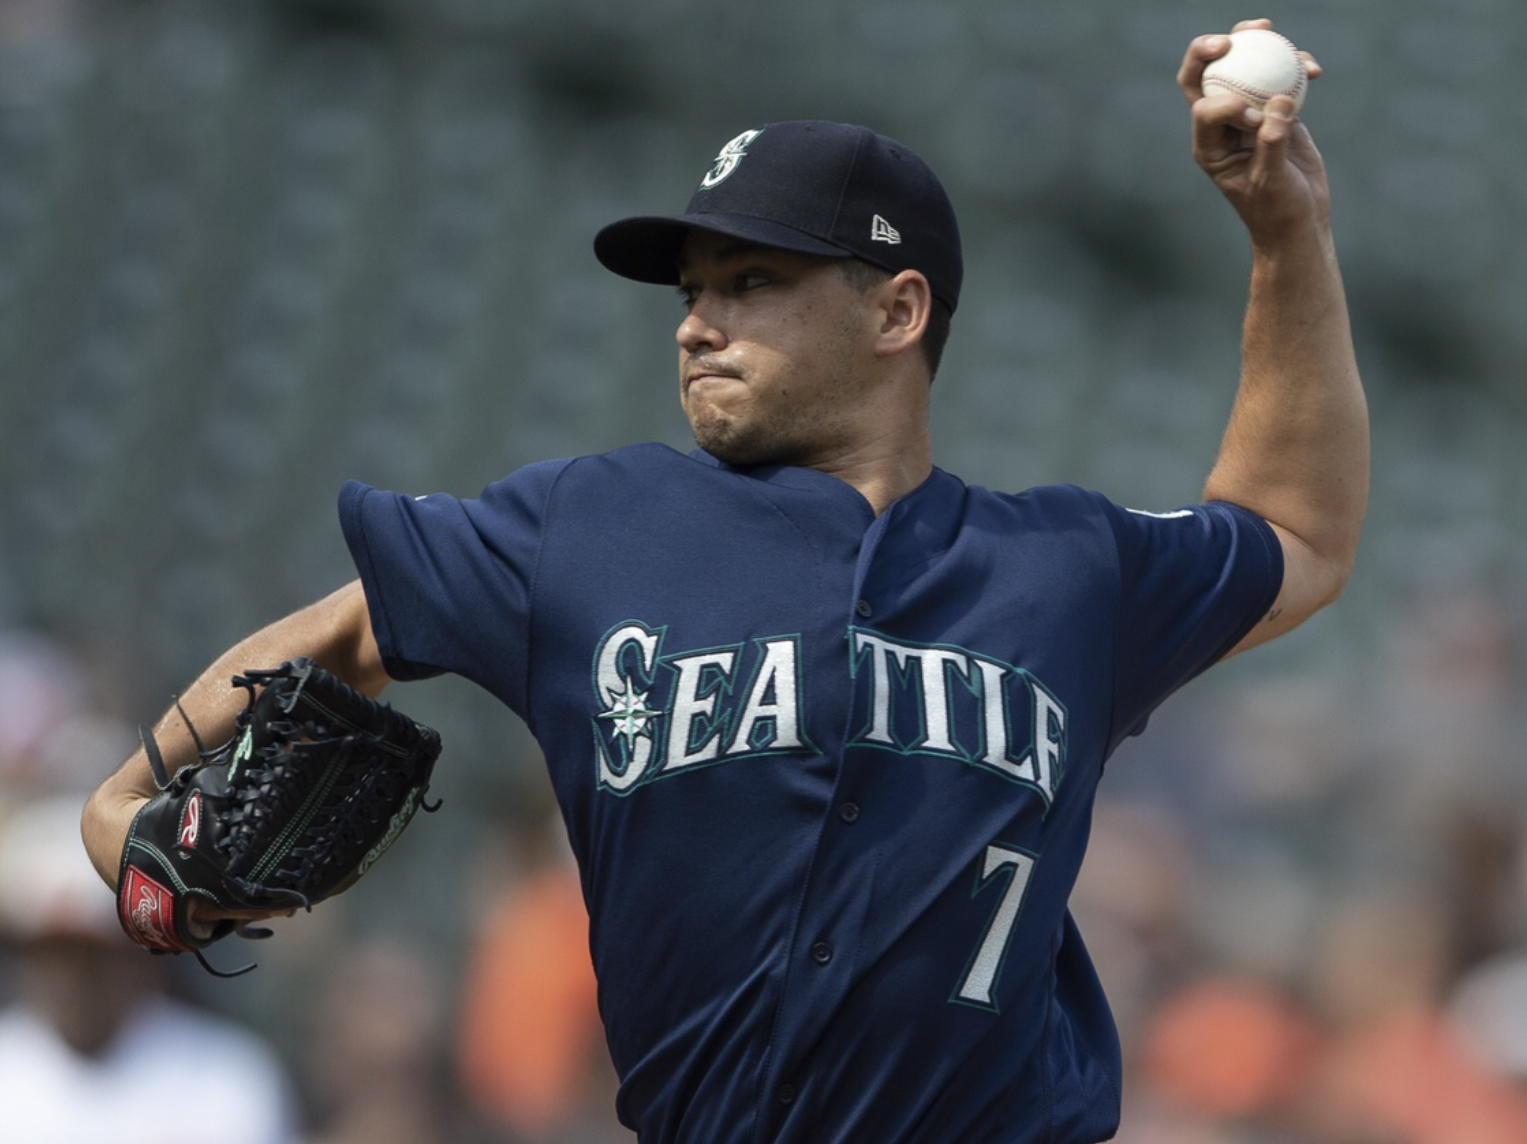 Report: Mariners sign ace Marco Gonzales to four-year, $30 million extension6 日前